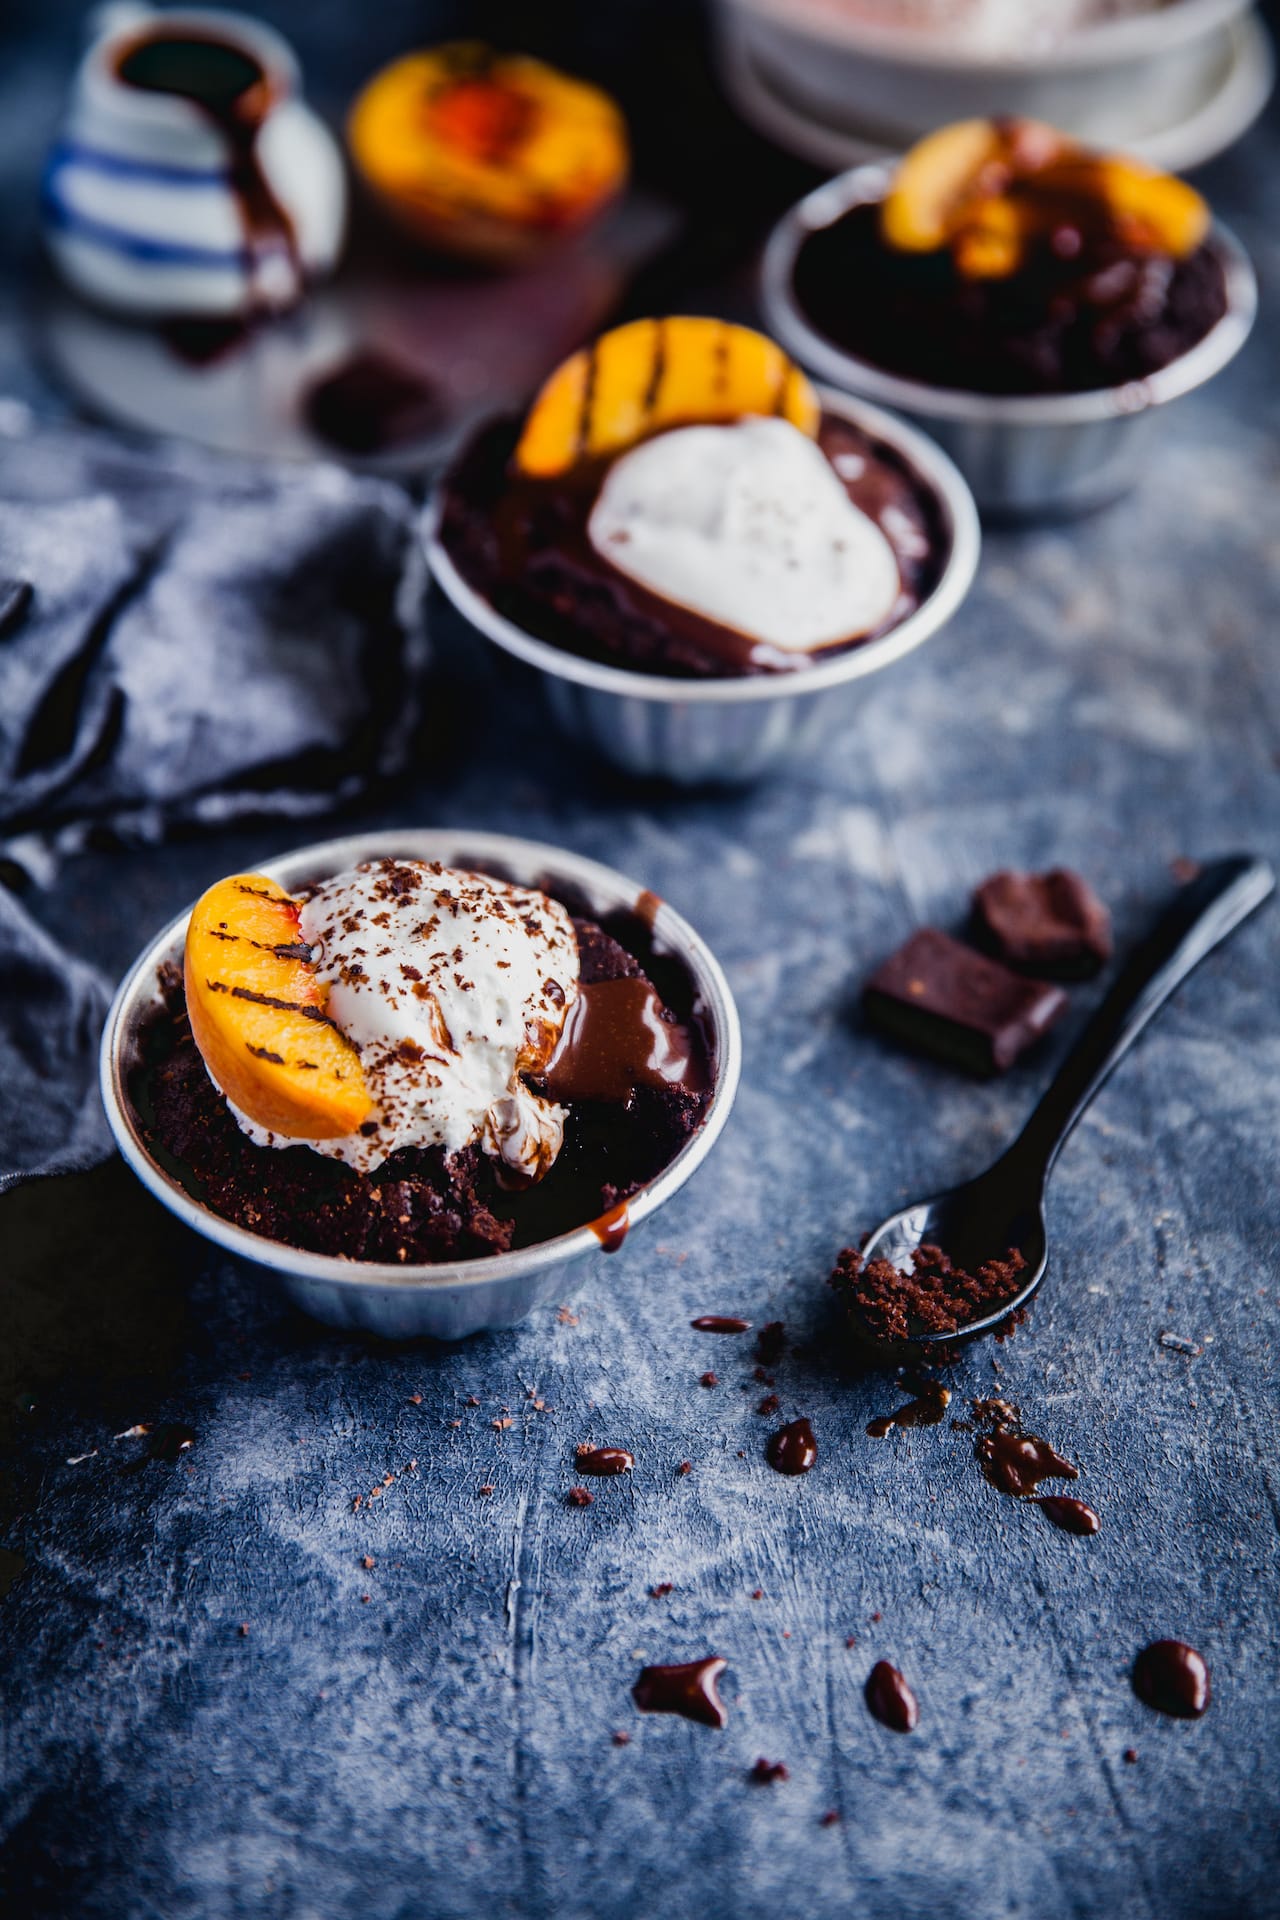 Chili Chocolate Pudding with Grilled Peaches | Playful Cooking